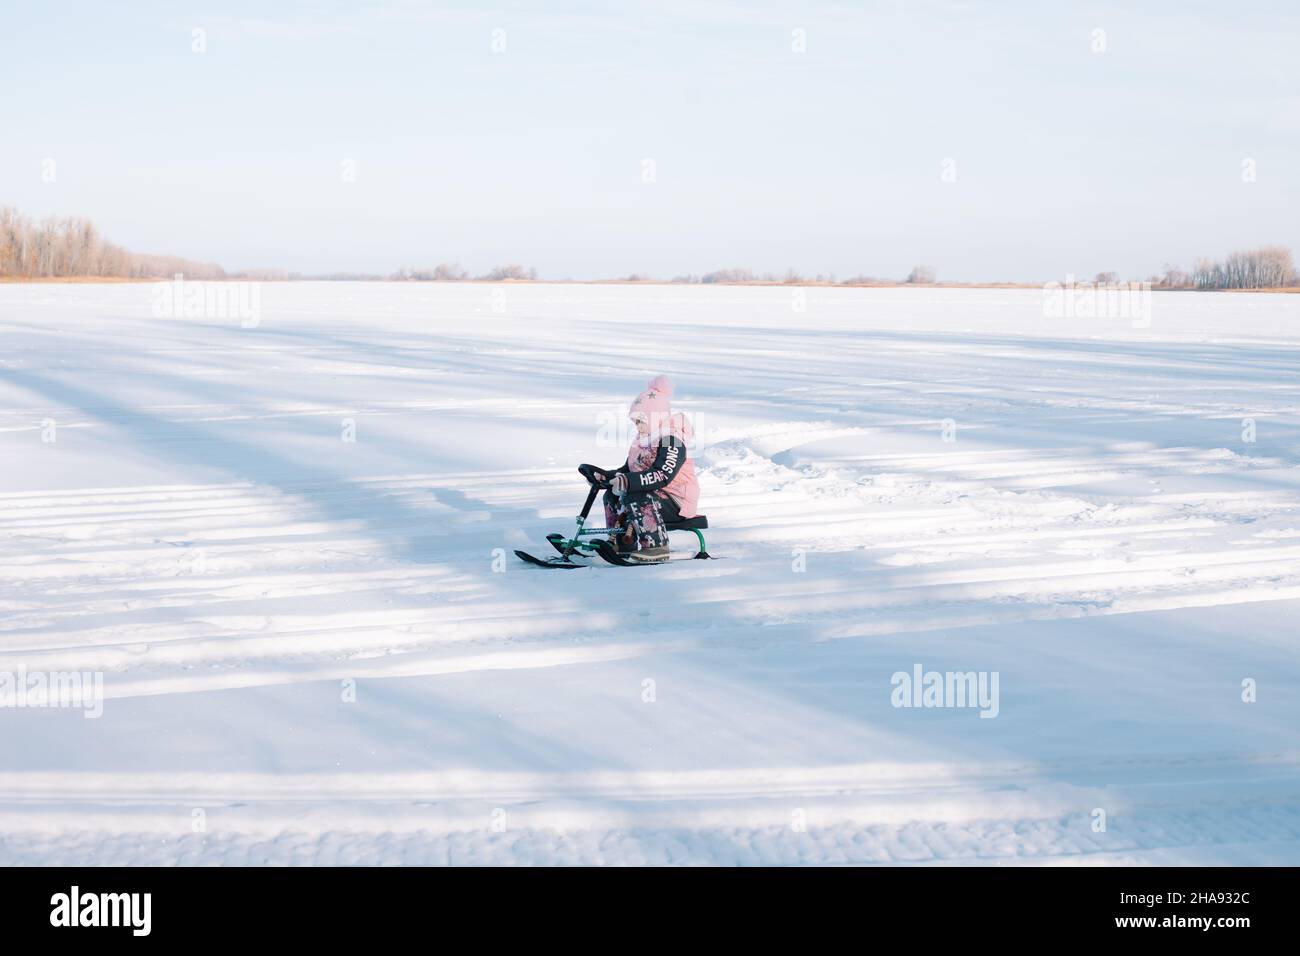 Child rides snowcat on snowy road. Little girl in pink warm jacket enjoys walk in nature and sledding on frozen river on sunny winter day, side view Stock Photo